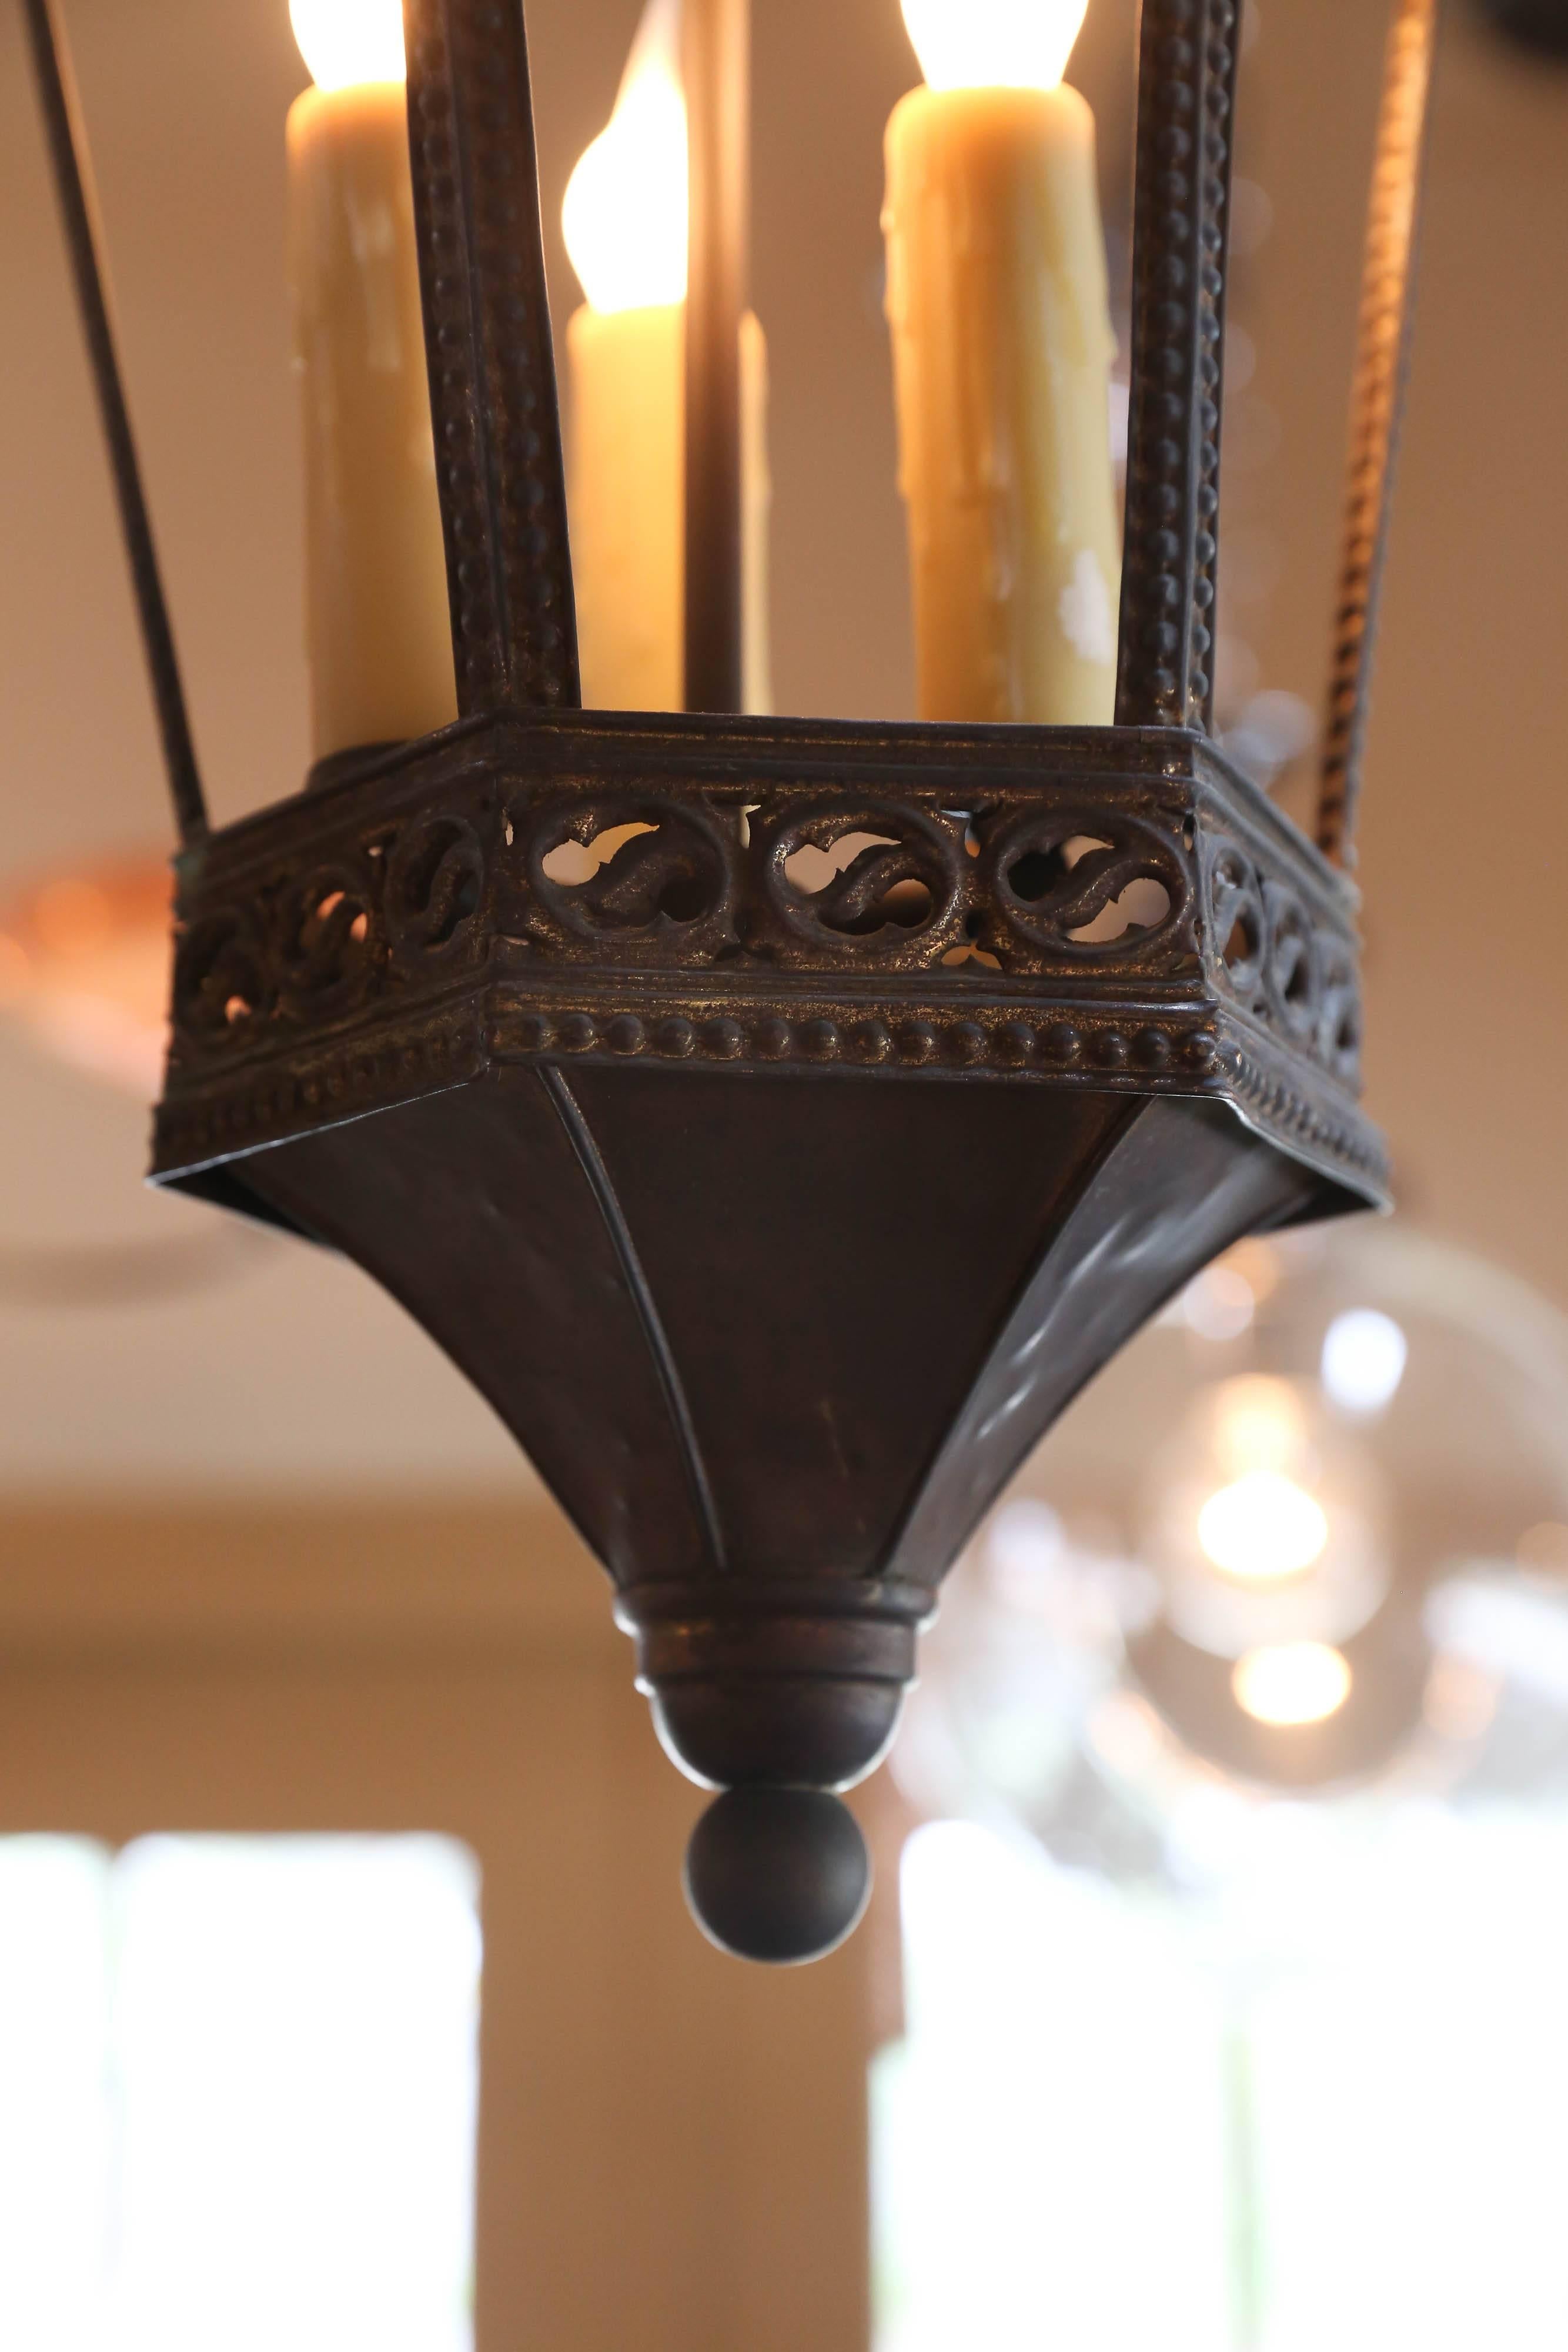 Early 20th Century Near-Pair Brass Gothic Revival Lanterns from France, circa 1900